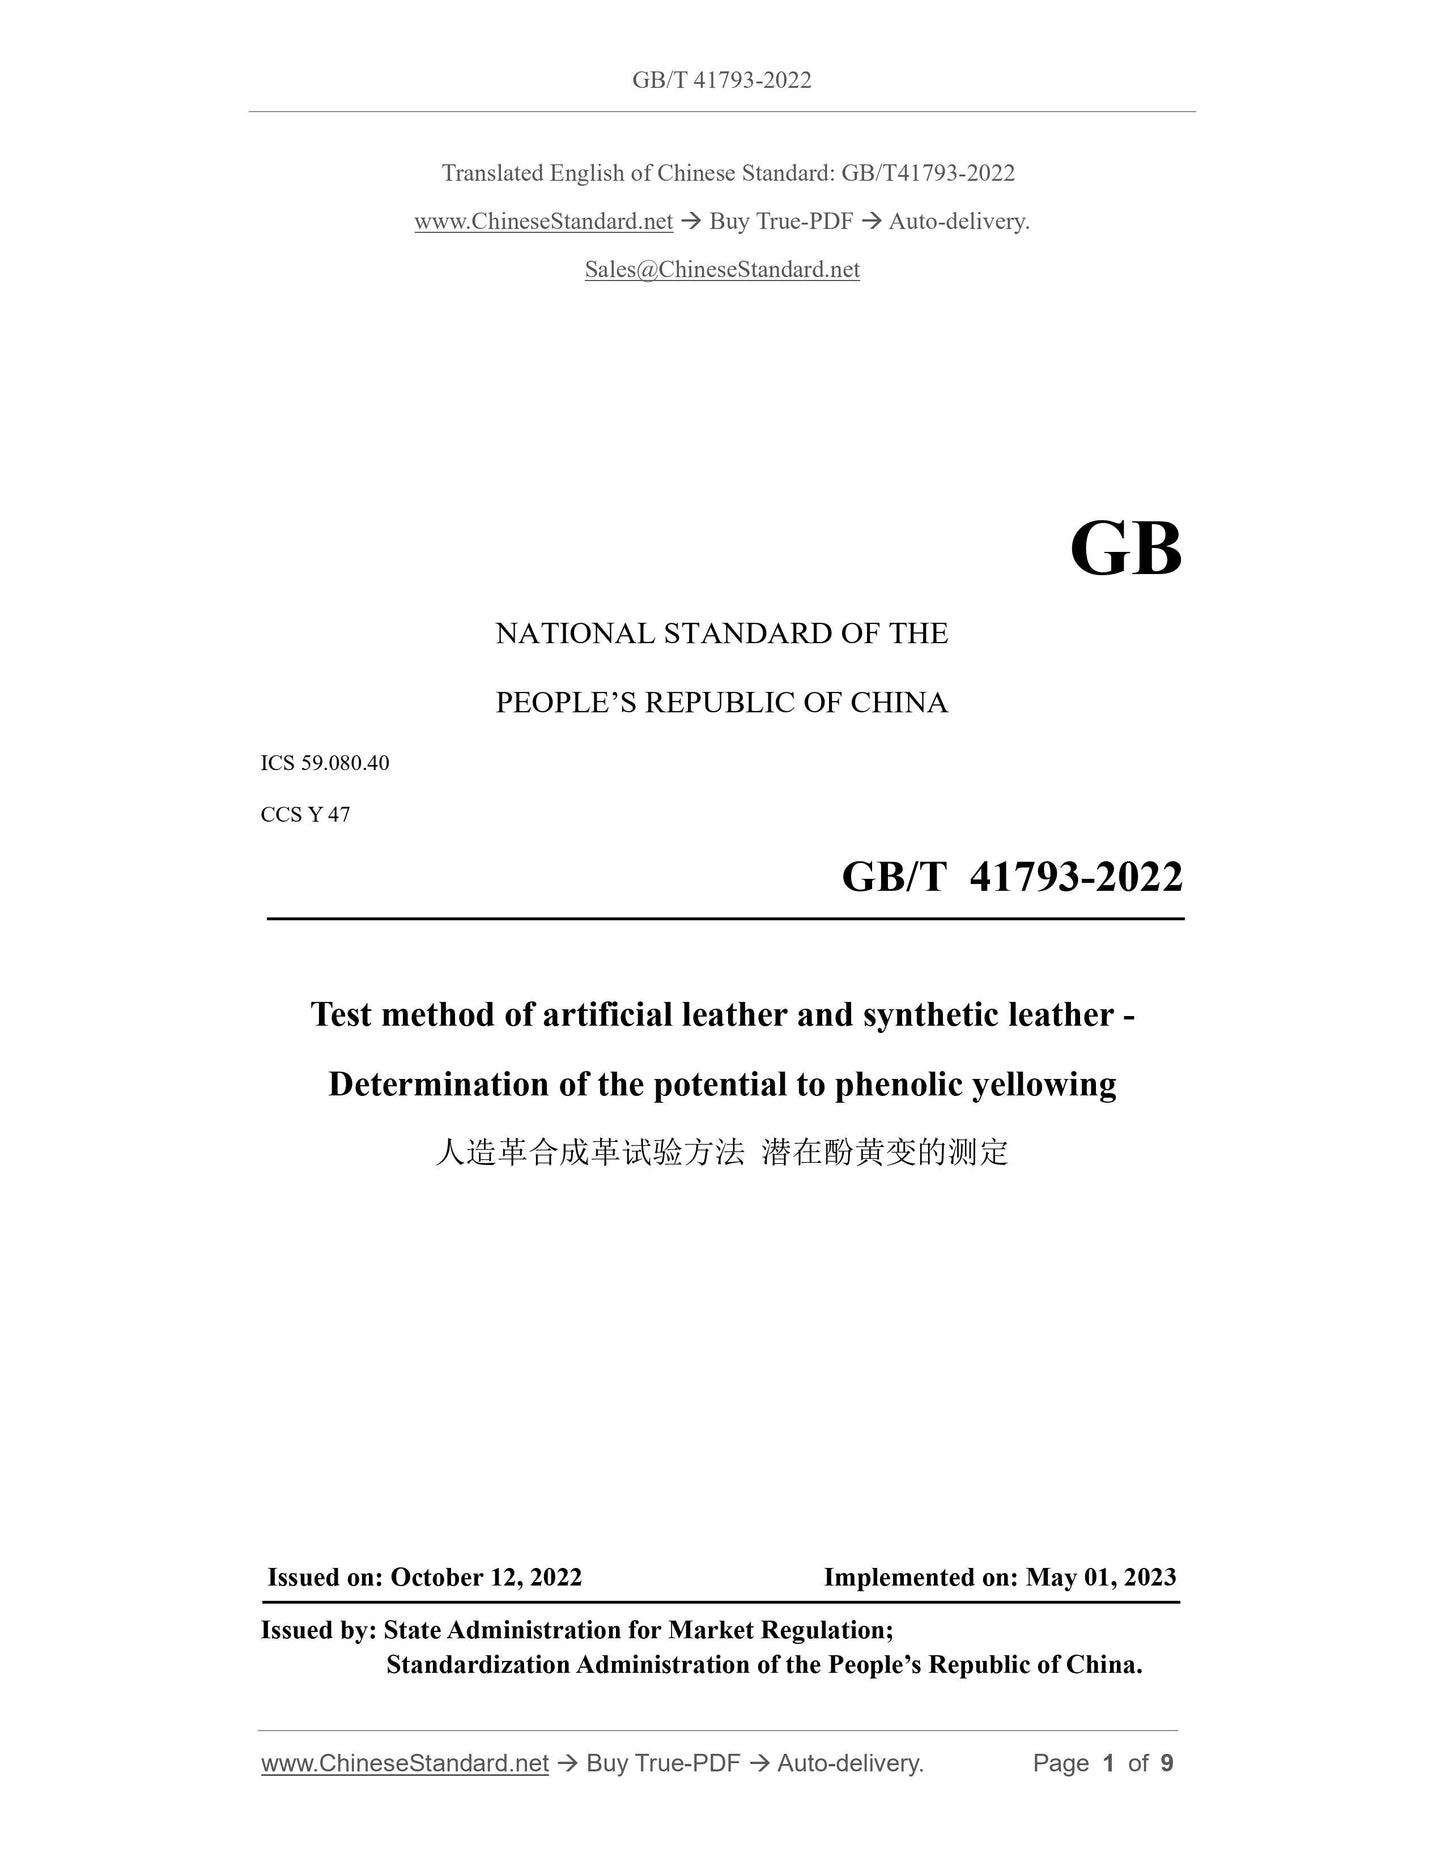 GB/T 41793-2022 Page 1